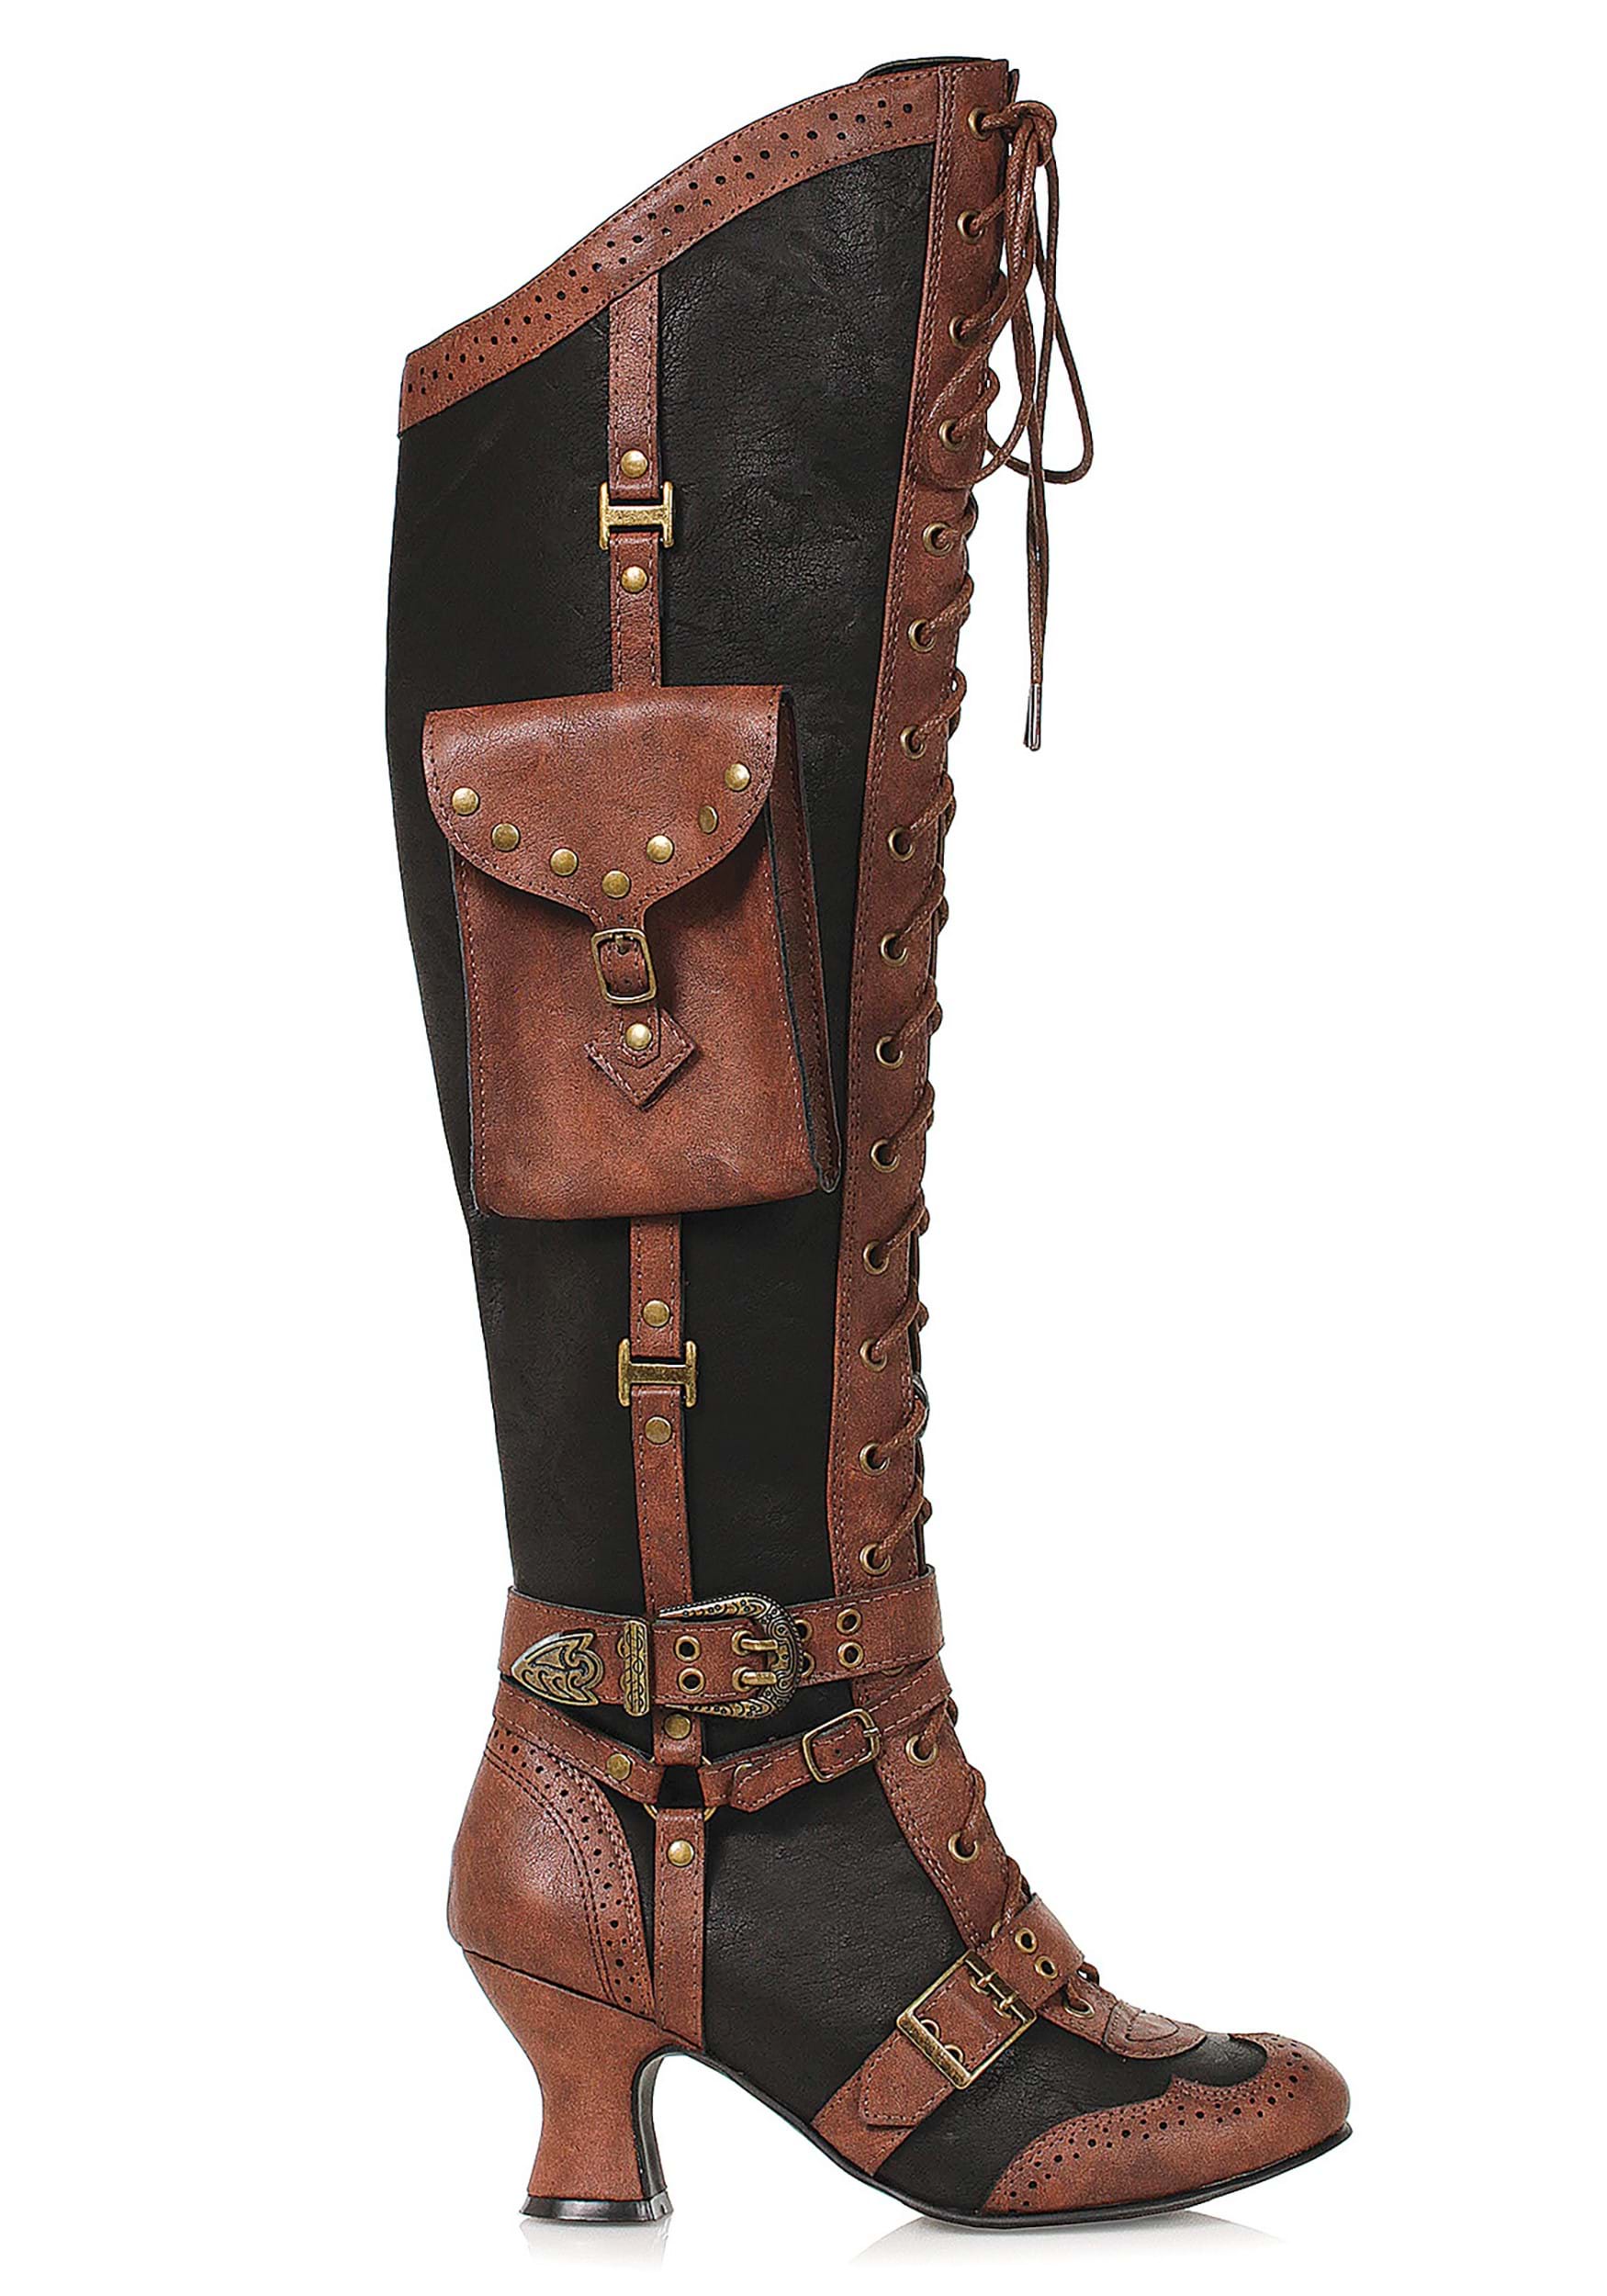 Women’s Lace Up Steampunk Heel Boots